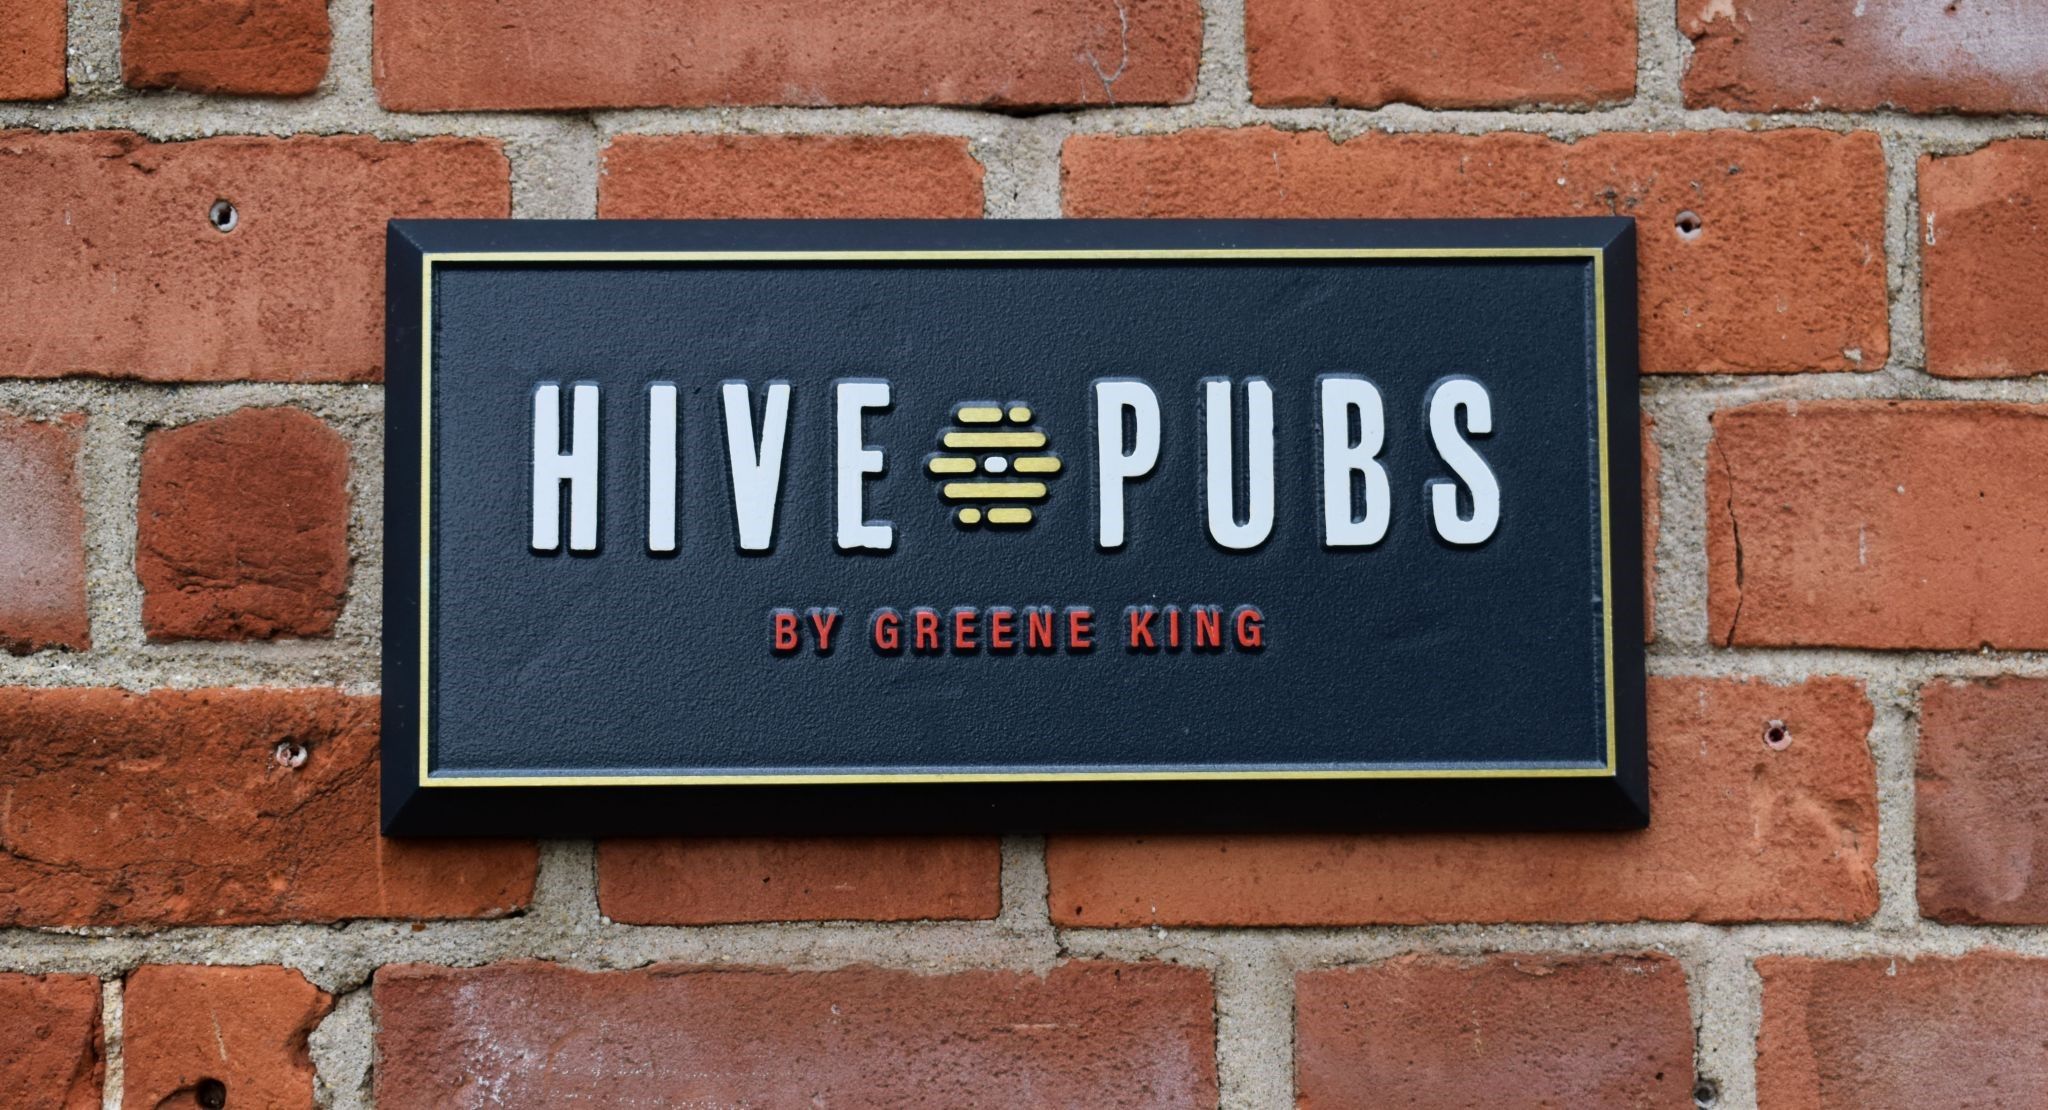 Greene King Pub Partners unveils new website landing page for Hive Pubs